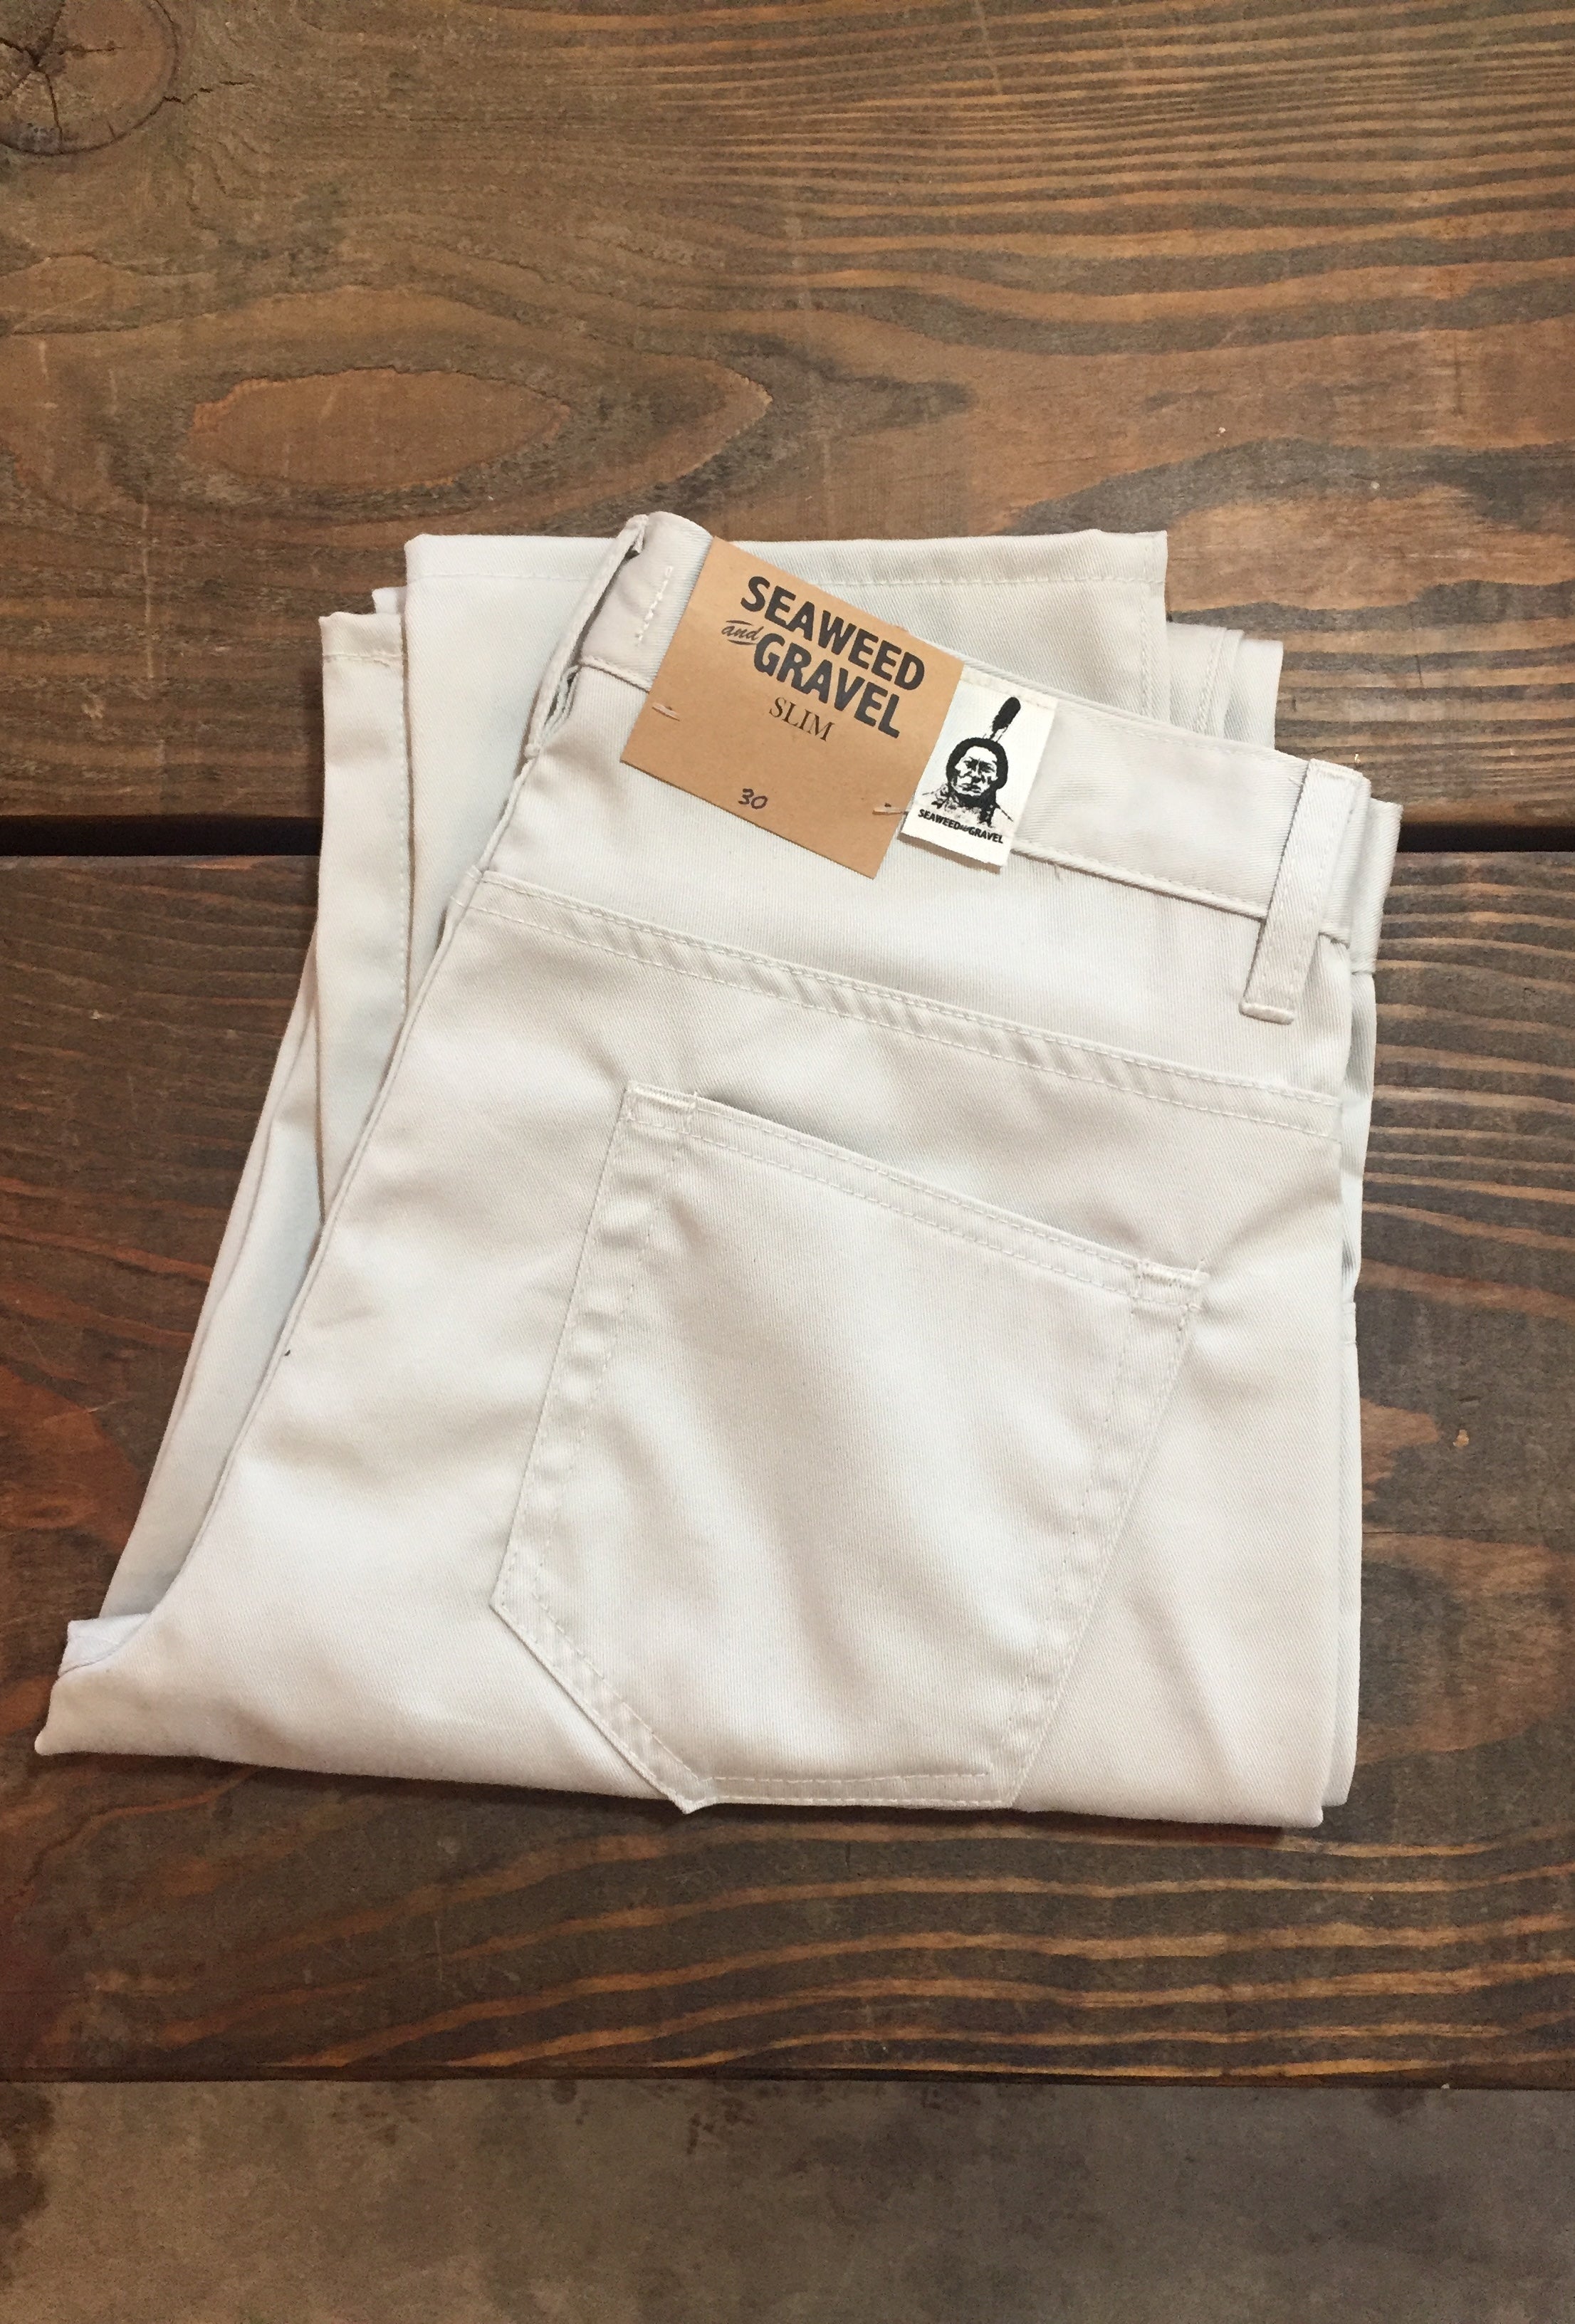 Twill Slim Pant by S&G take 50% Off List Price